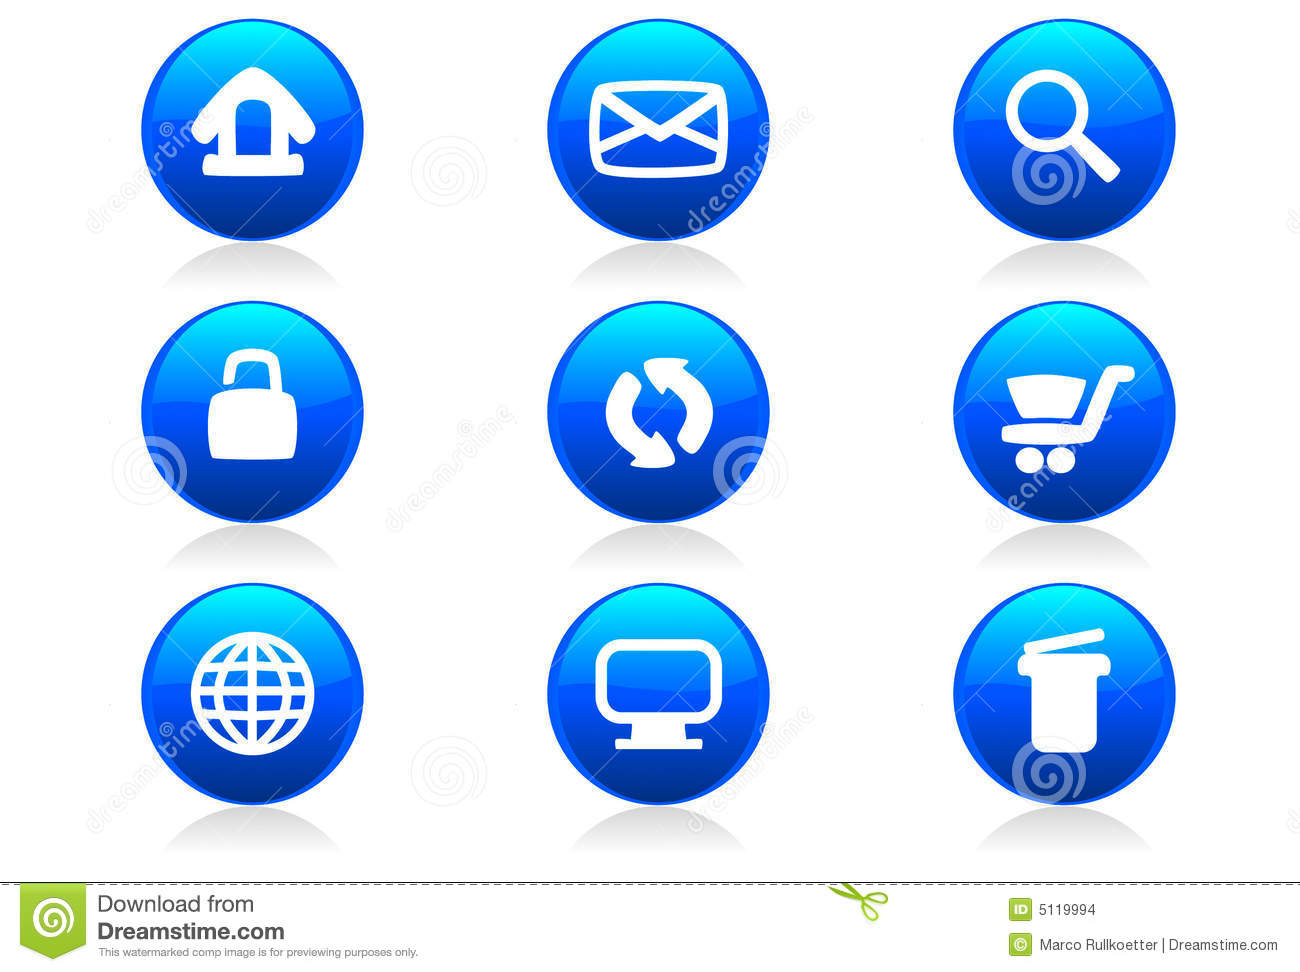 17 3D Website Buttons And Icons Images